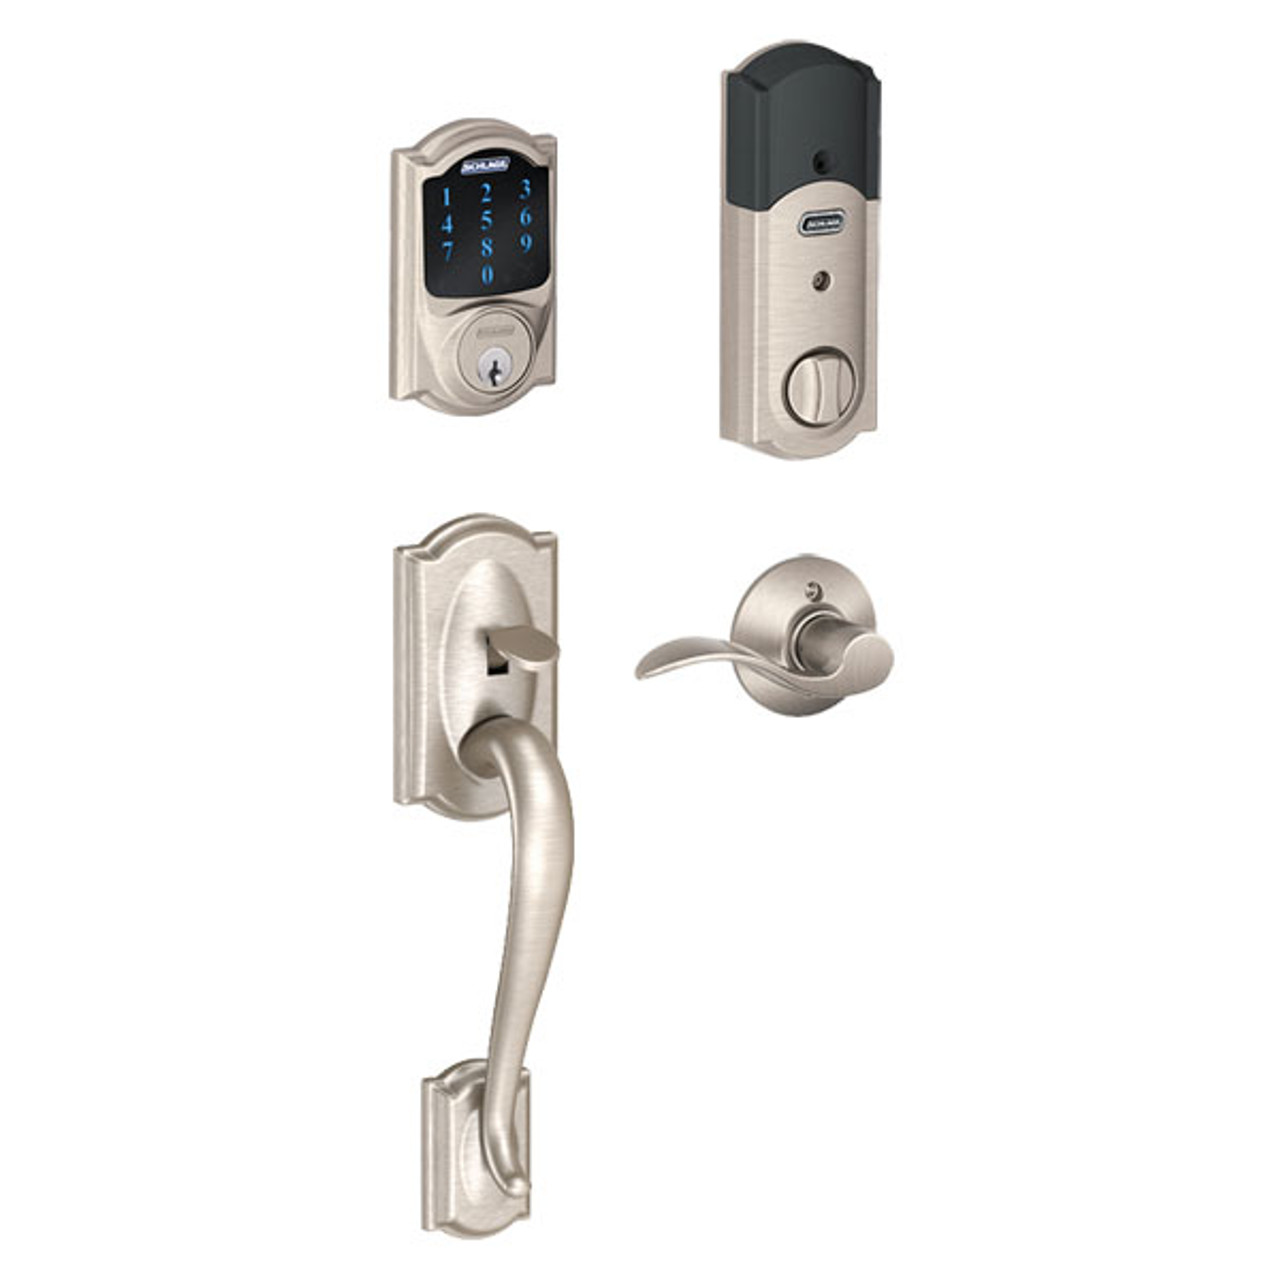 Schlage Camelot Touch Lock with Accent Lever - Satin Nickel